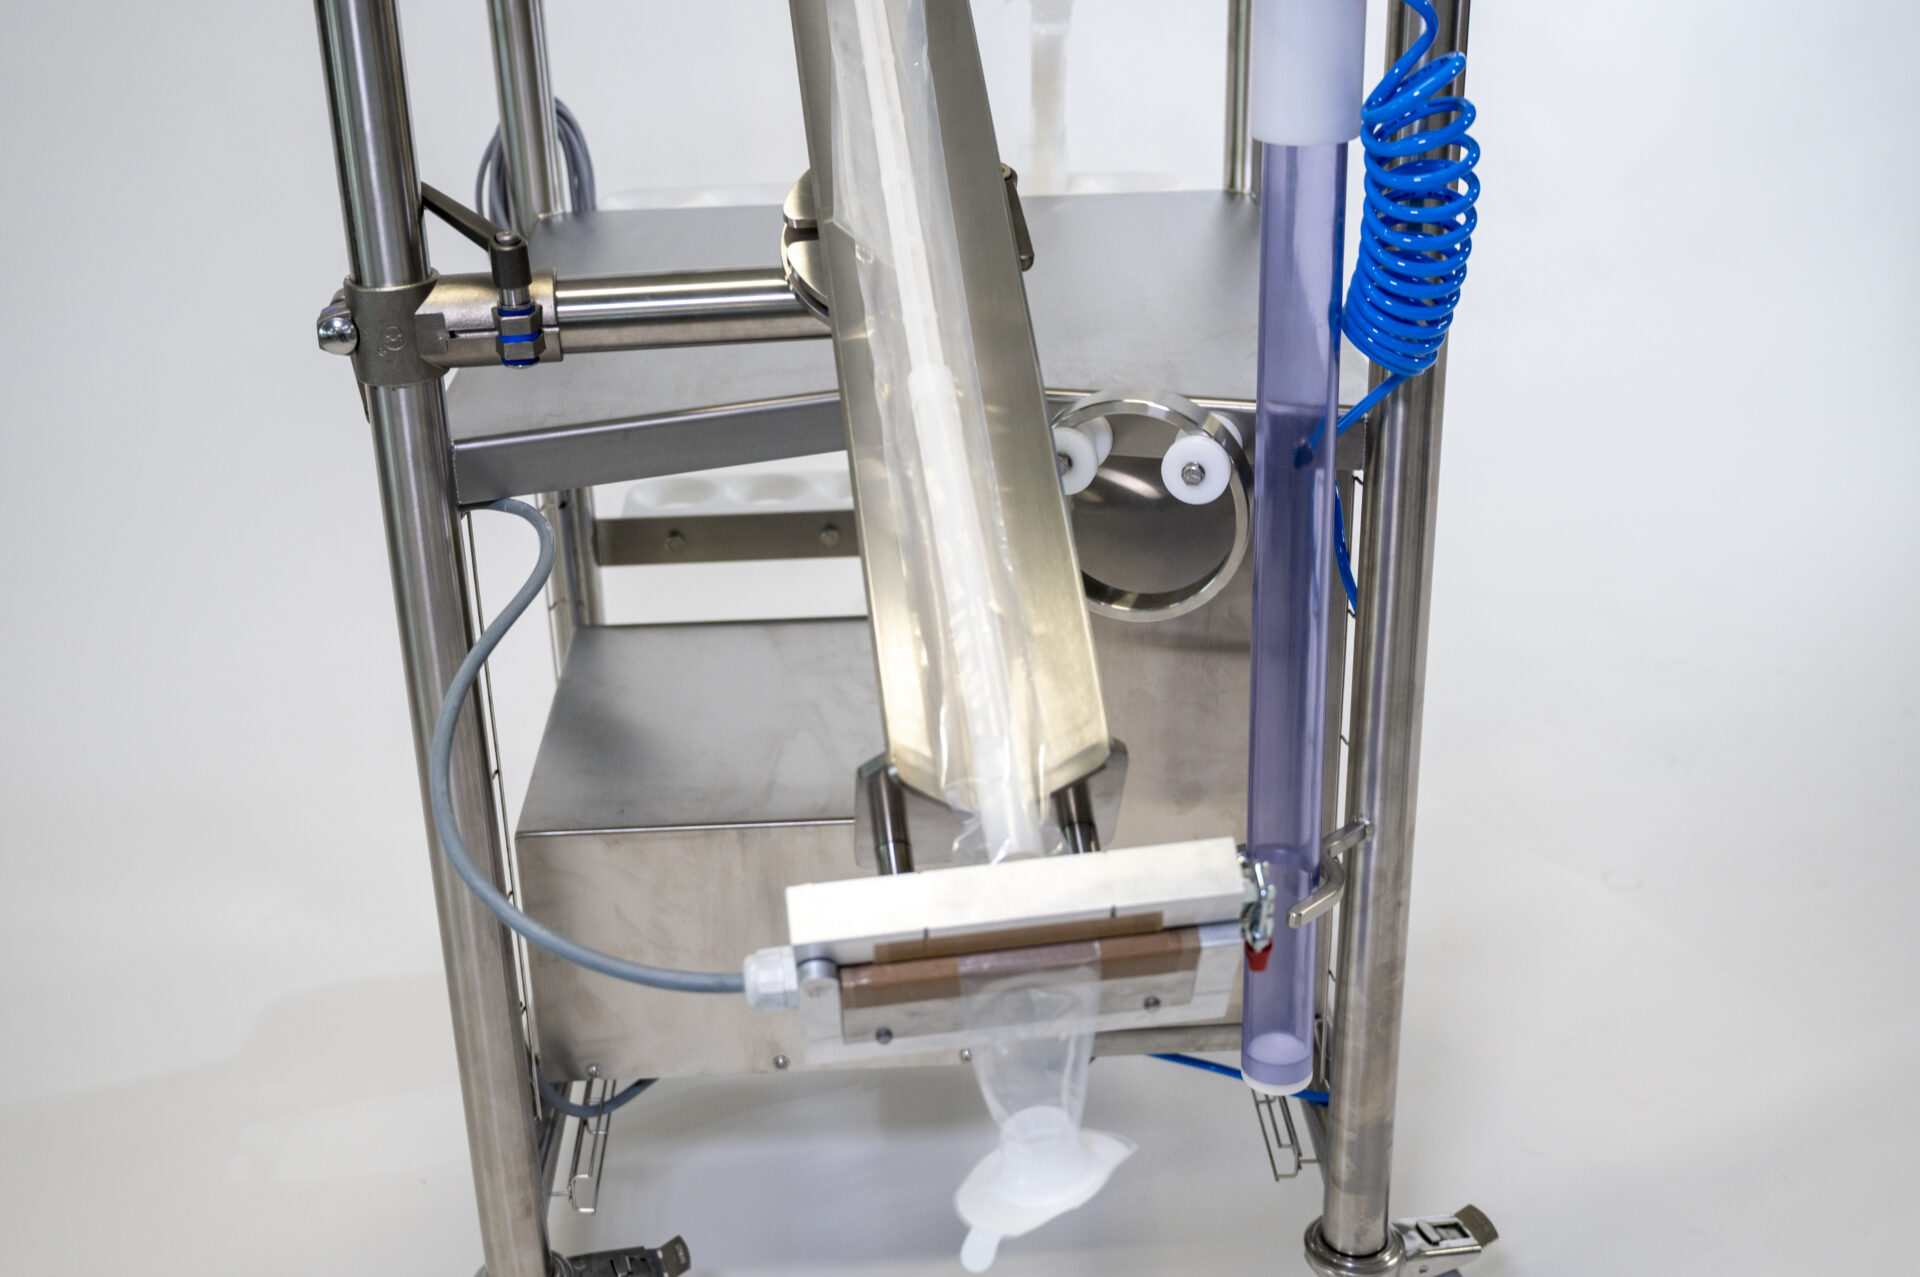 Detailed view of a HECHT Containment Sampling Stick CPS with the thermal welding option, depicting the device's complex assembly with a transparent sampling bag attached, highlighting the technology's capability for secure and sterile sampling in pharmaceutical or chemical industries.